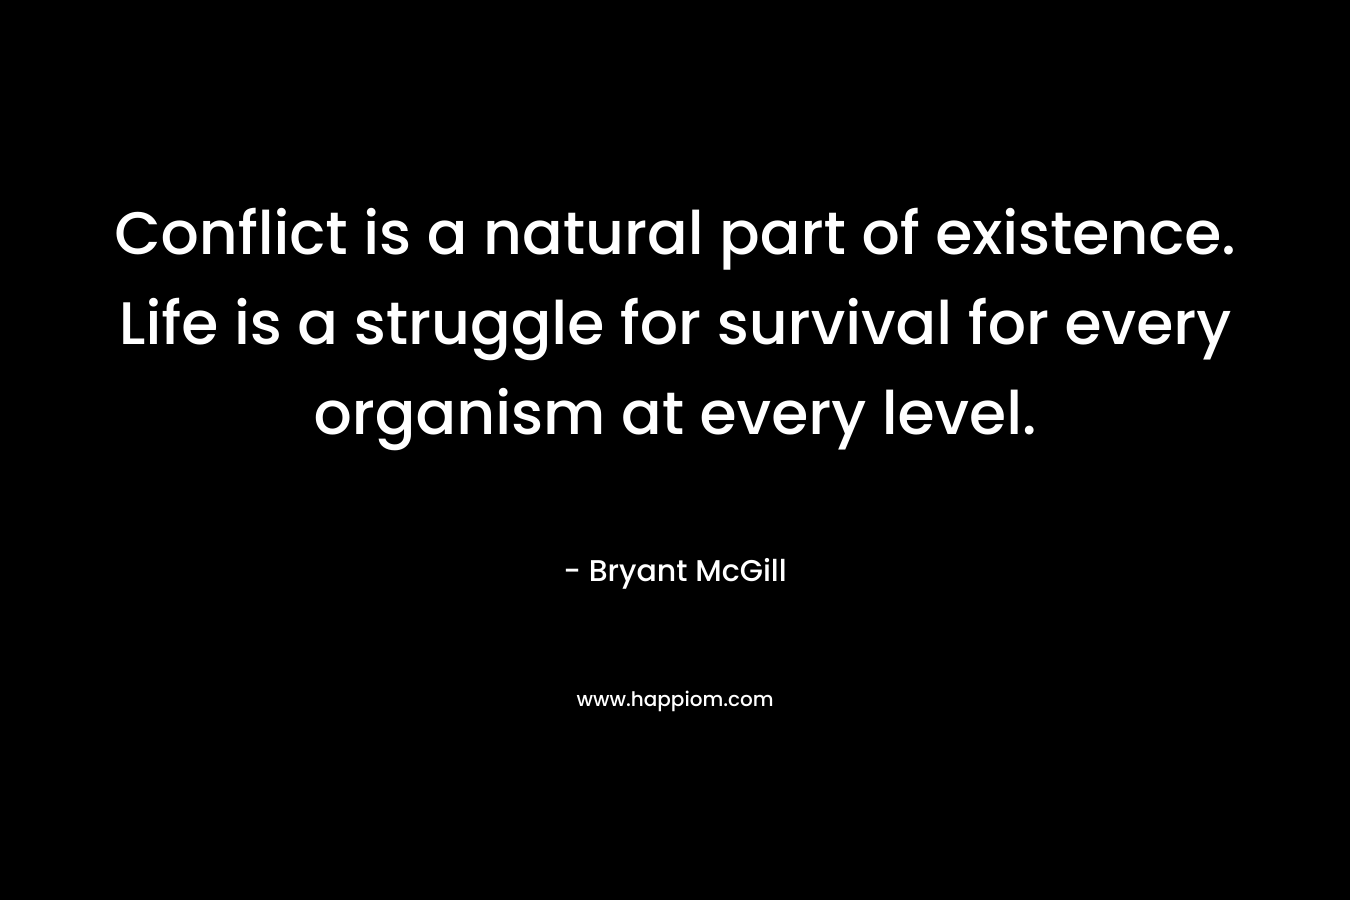 Conflict is a natural part of existence. Life is a struggle for survival for every organism at every level. – Bryant McGill